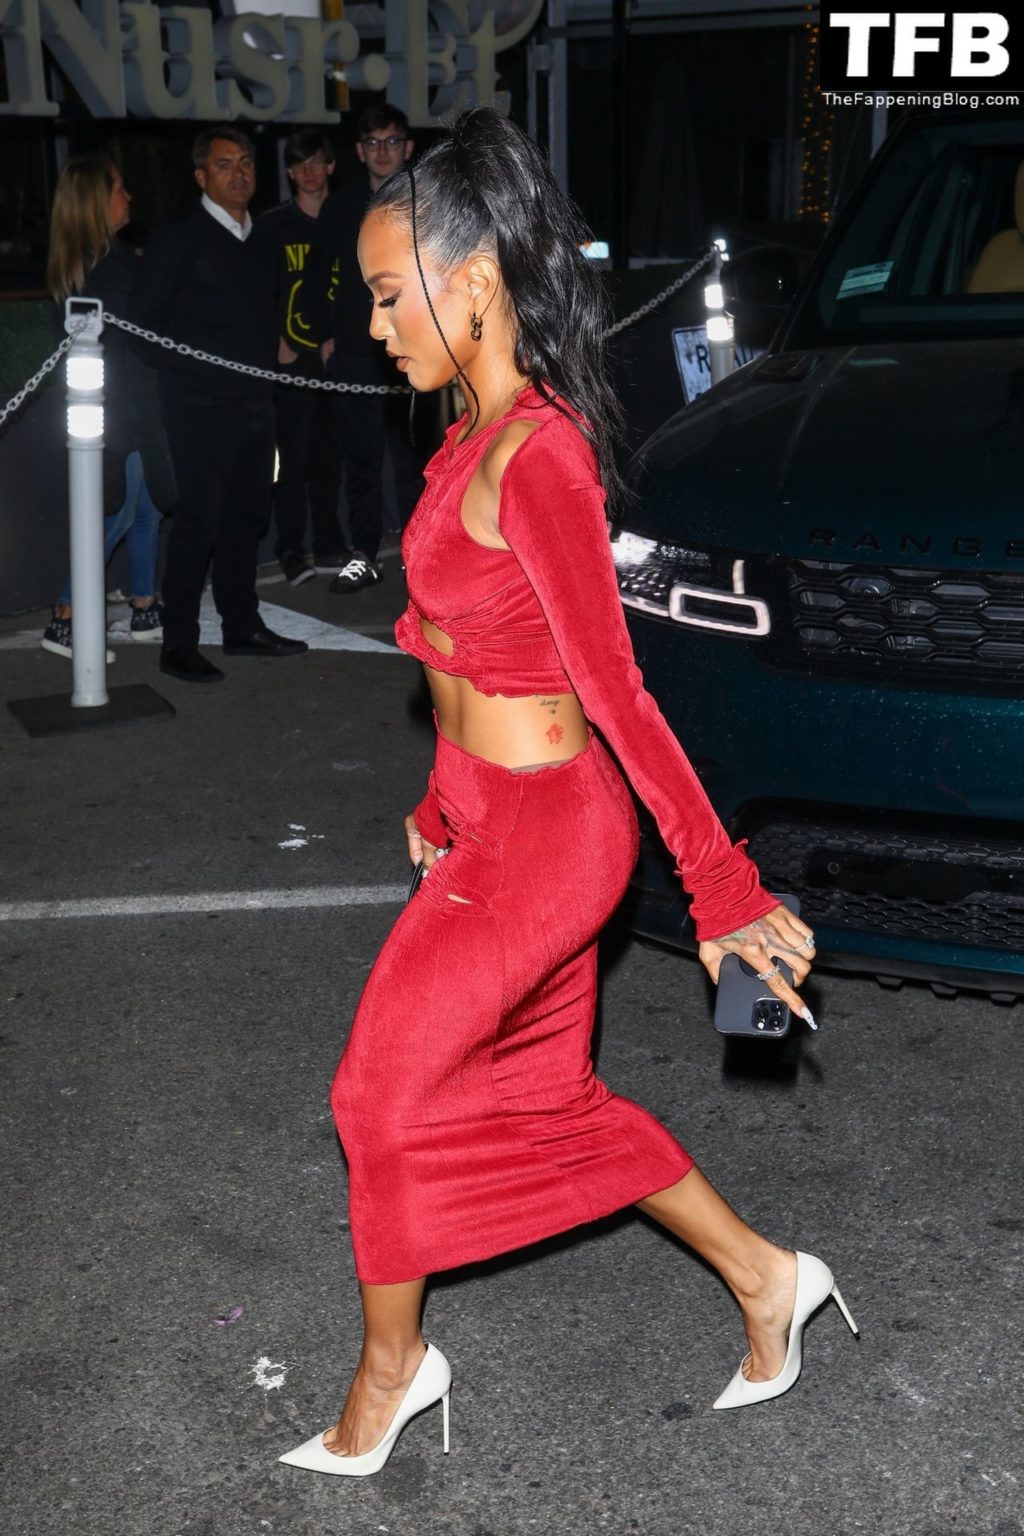 Karrueche Tran Sexy The Fappening Blog 49 1024x1536 - Karrueche Tran Shows Her Pokies in a Red Dress at The Hollywood Reporter’s Oscar Nominees Night (68 Photos)